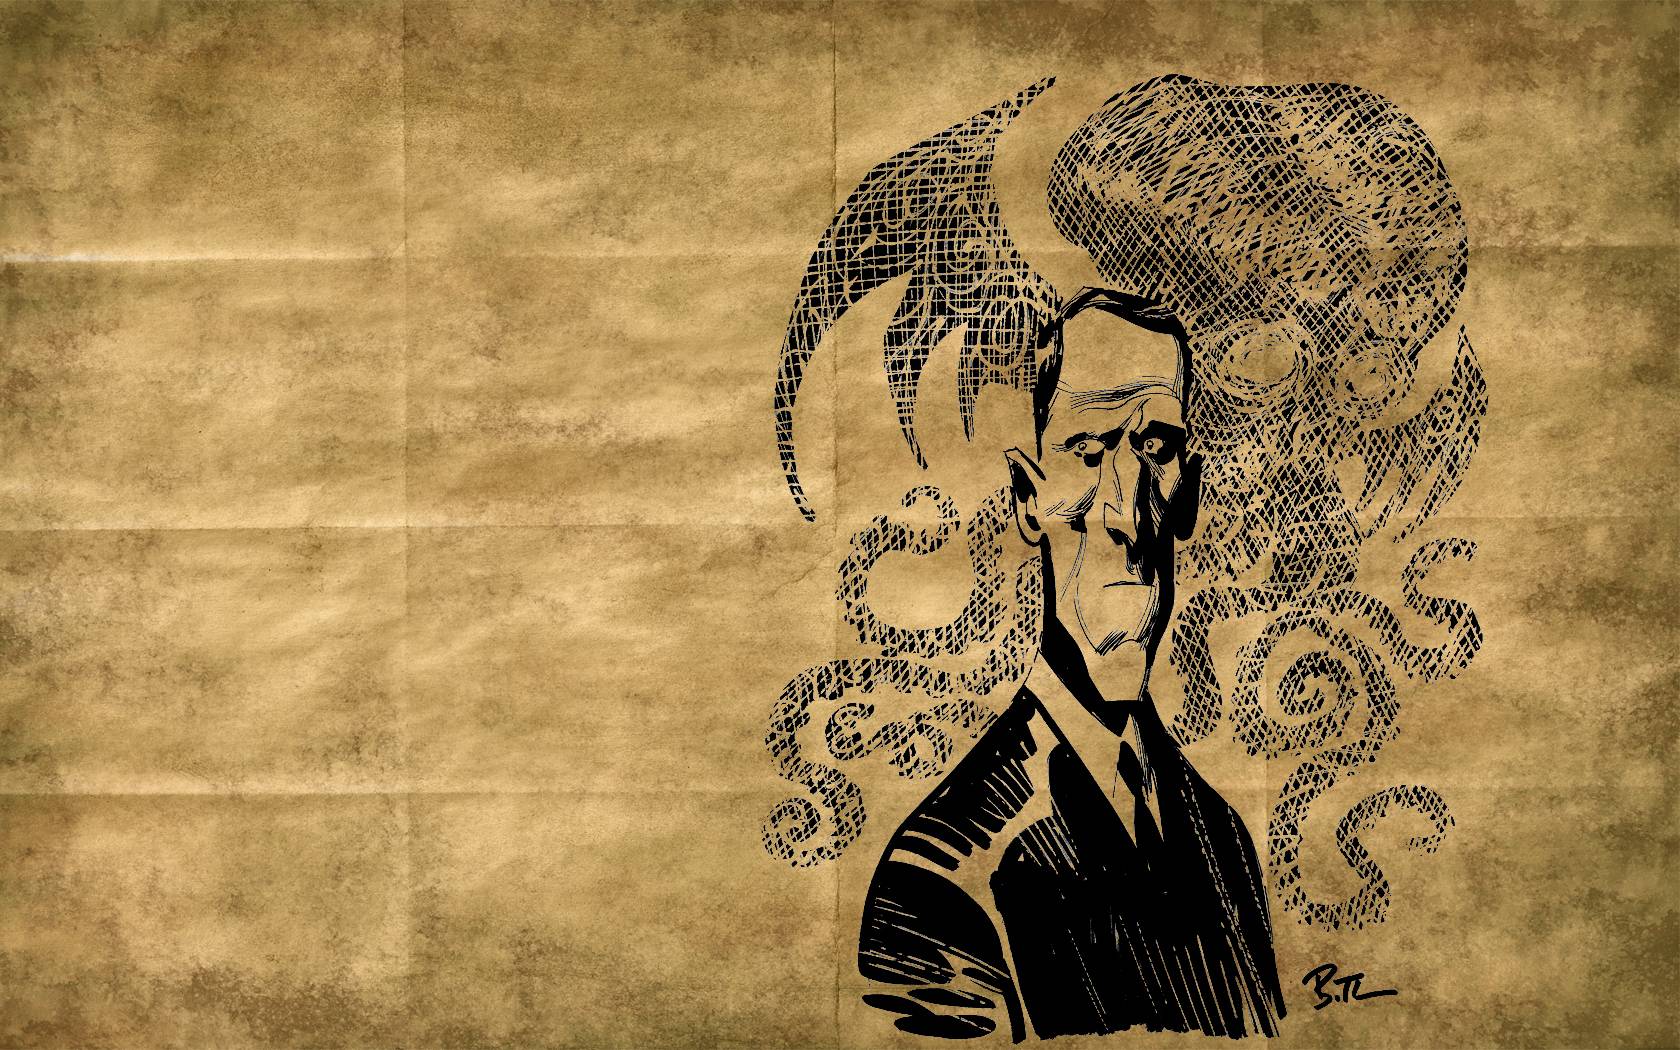 Cthulhu Hp Lovecraft Doctor Who Daleks HD Wallpaper 2767503